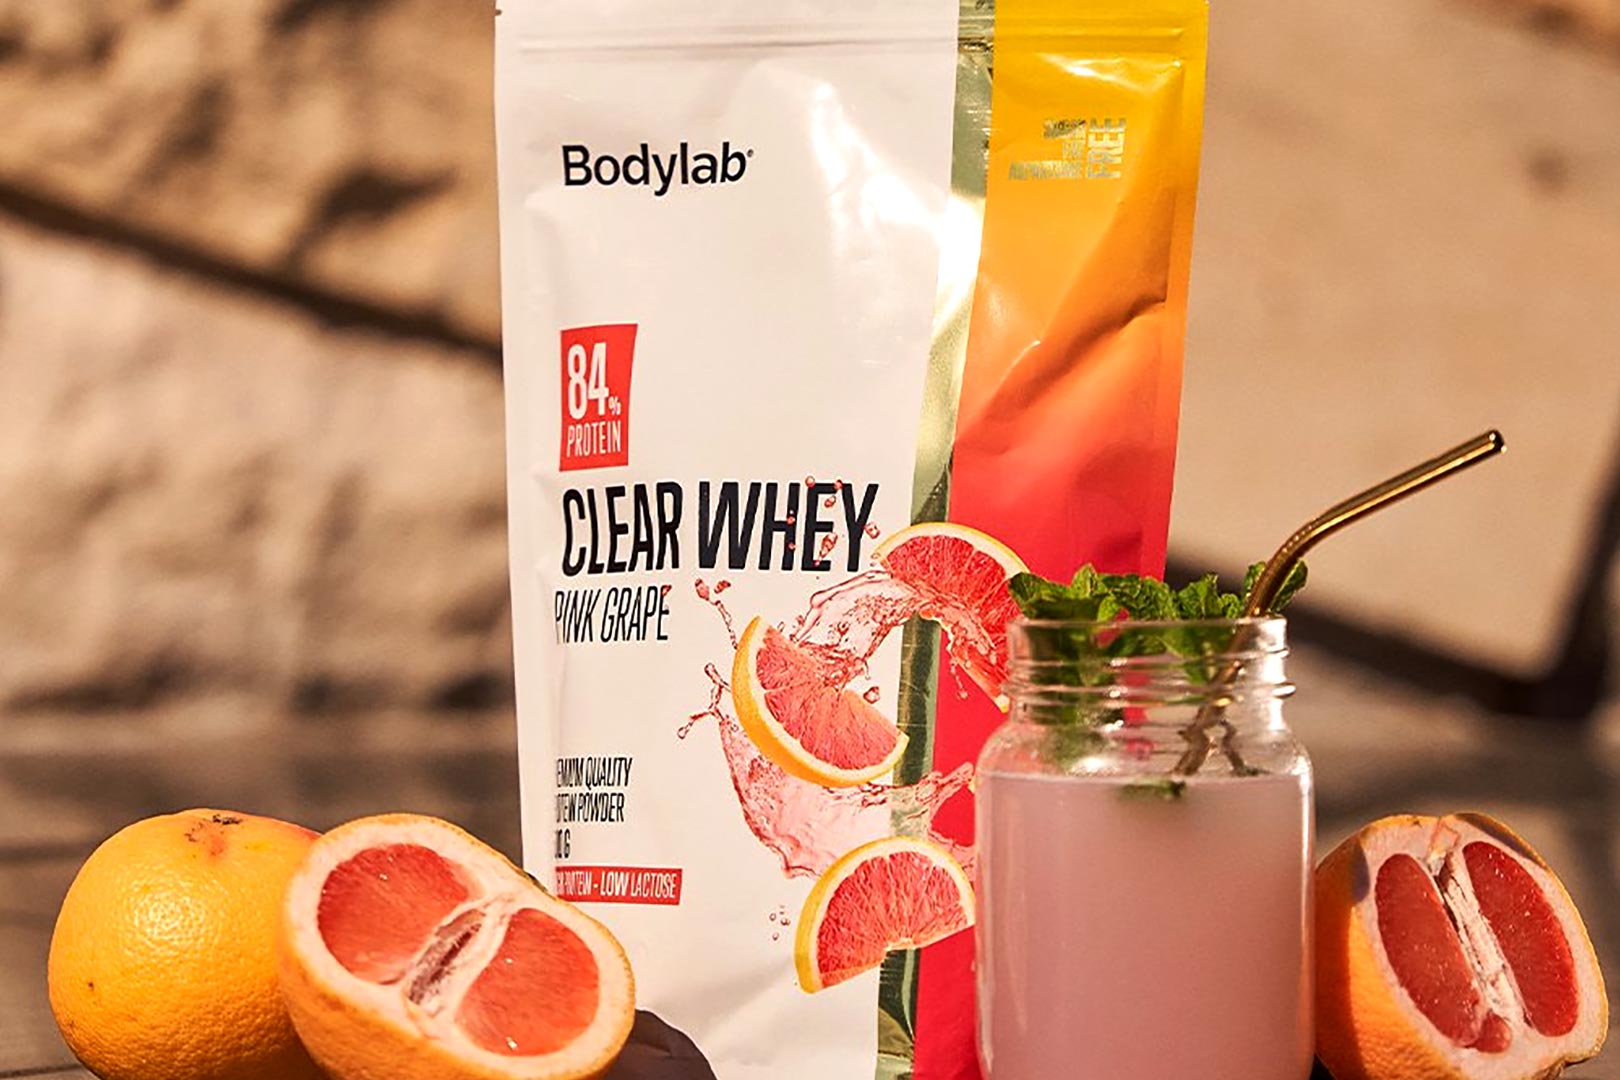 Bodylab Pink Grape Clear Whey